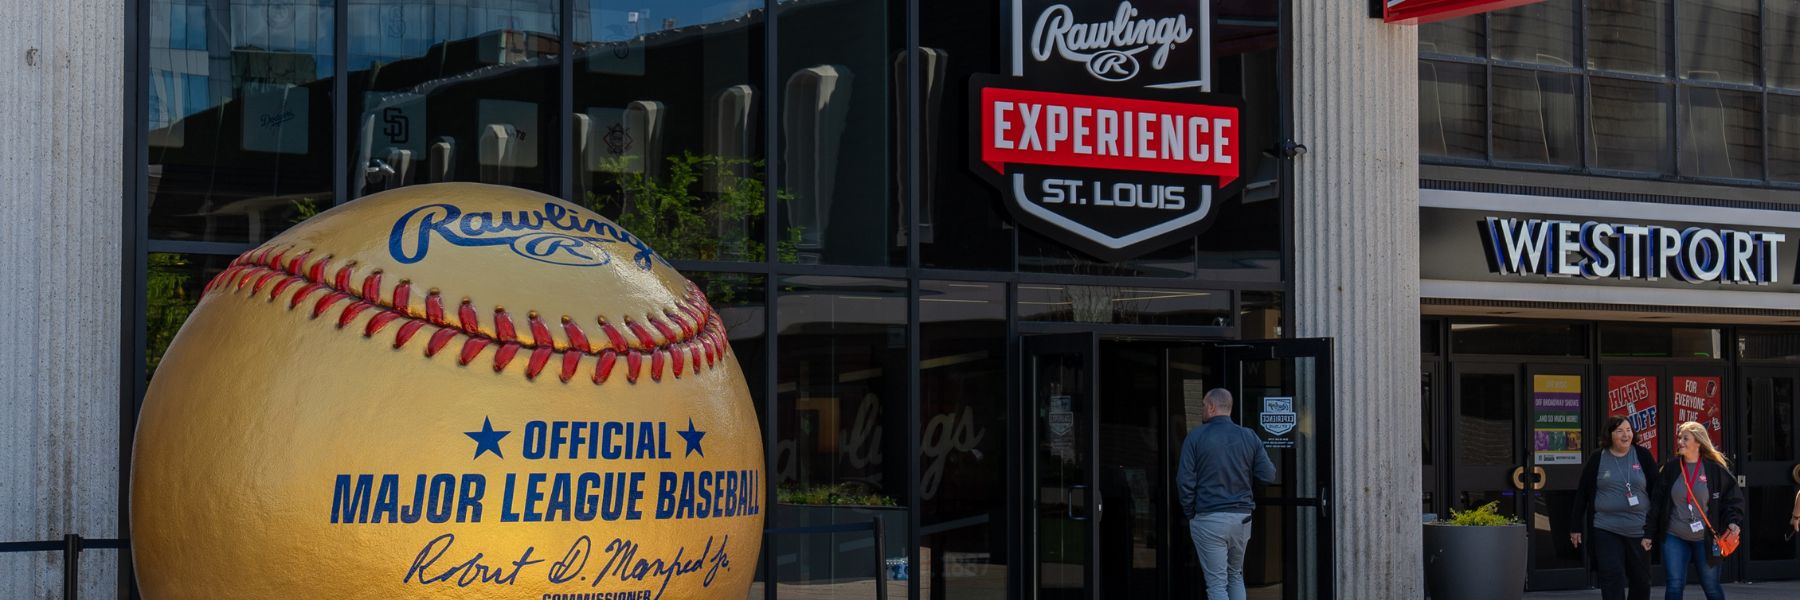 Rawlings Sporting Goods opens a new immersive experience at Westport Plaza in St. Louis.